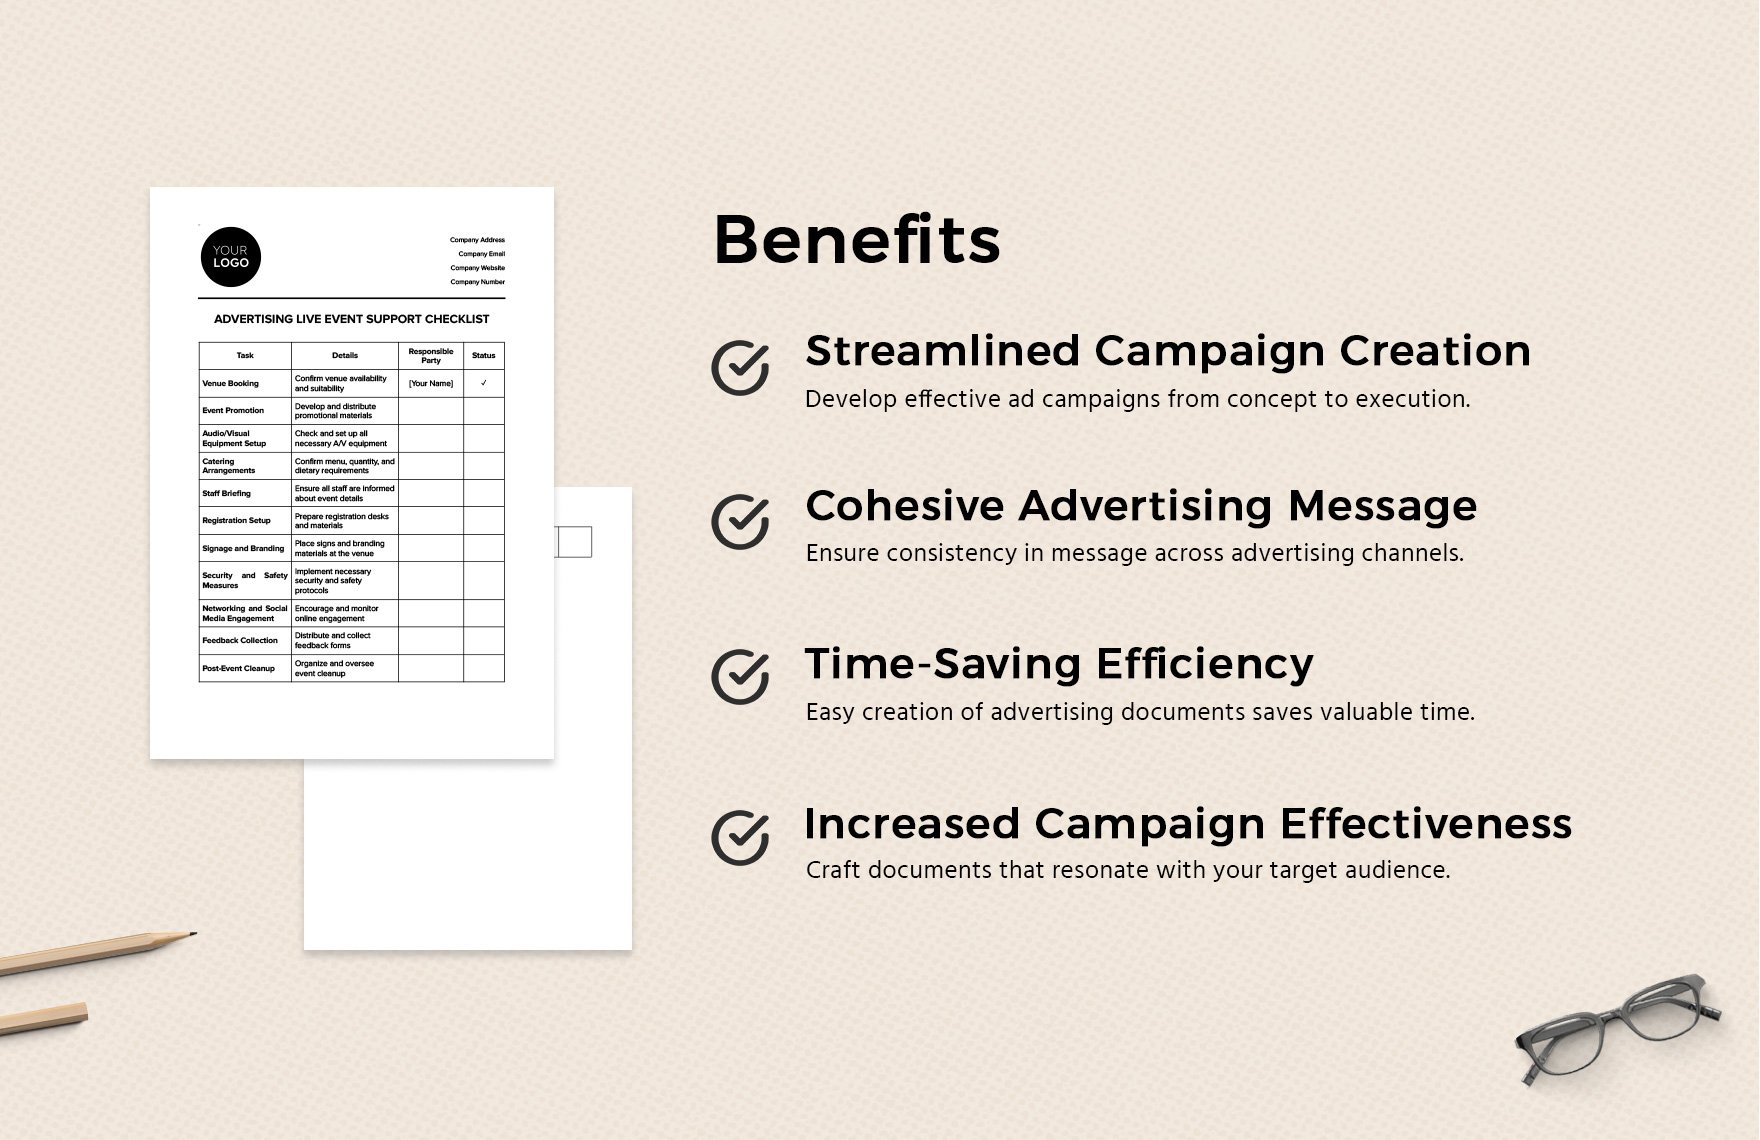 Advertising Live Event Support Checklist Template